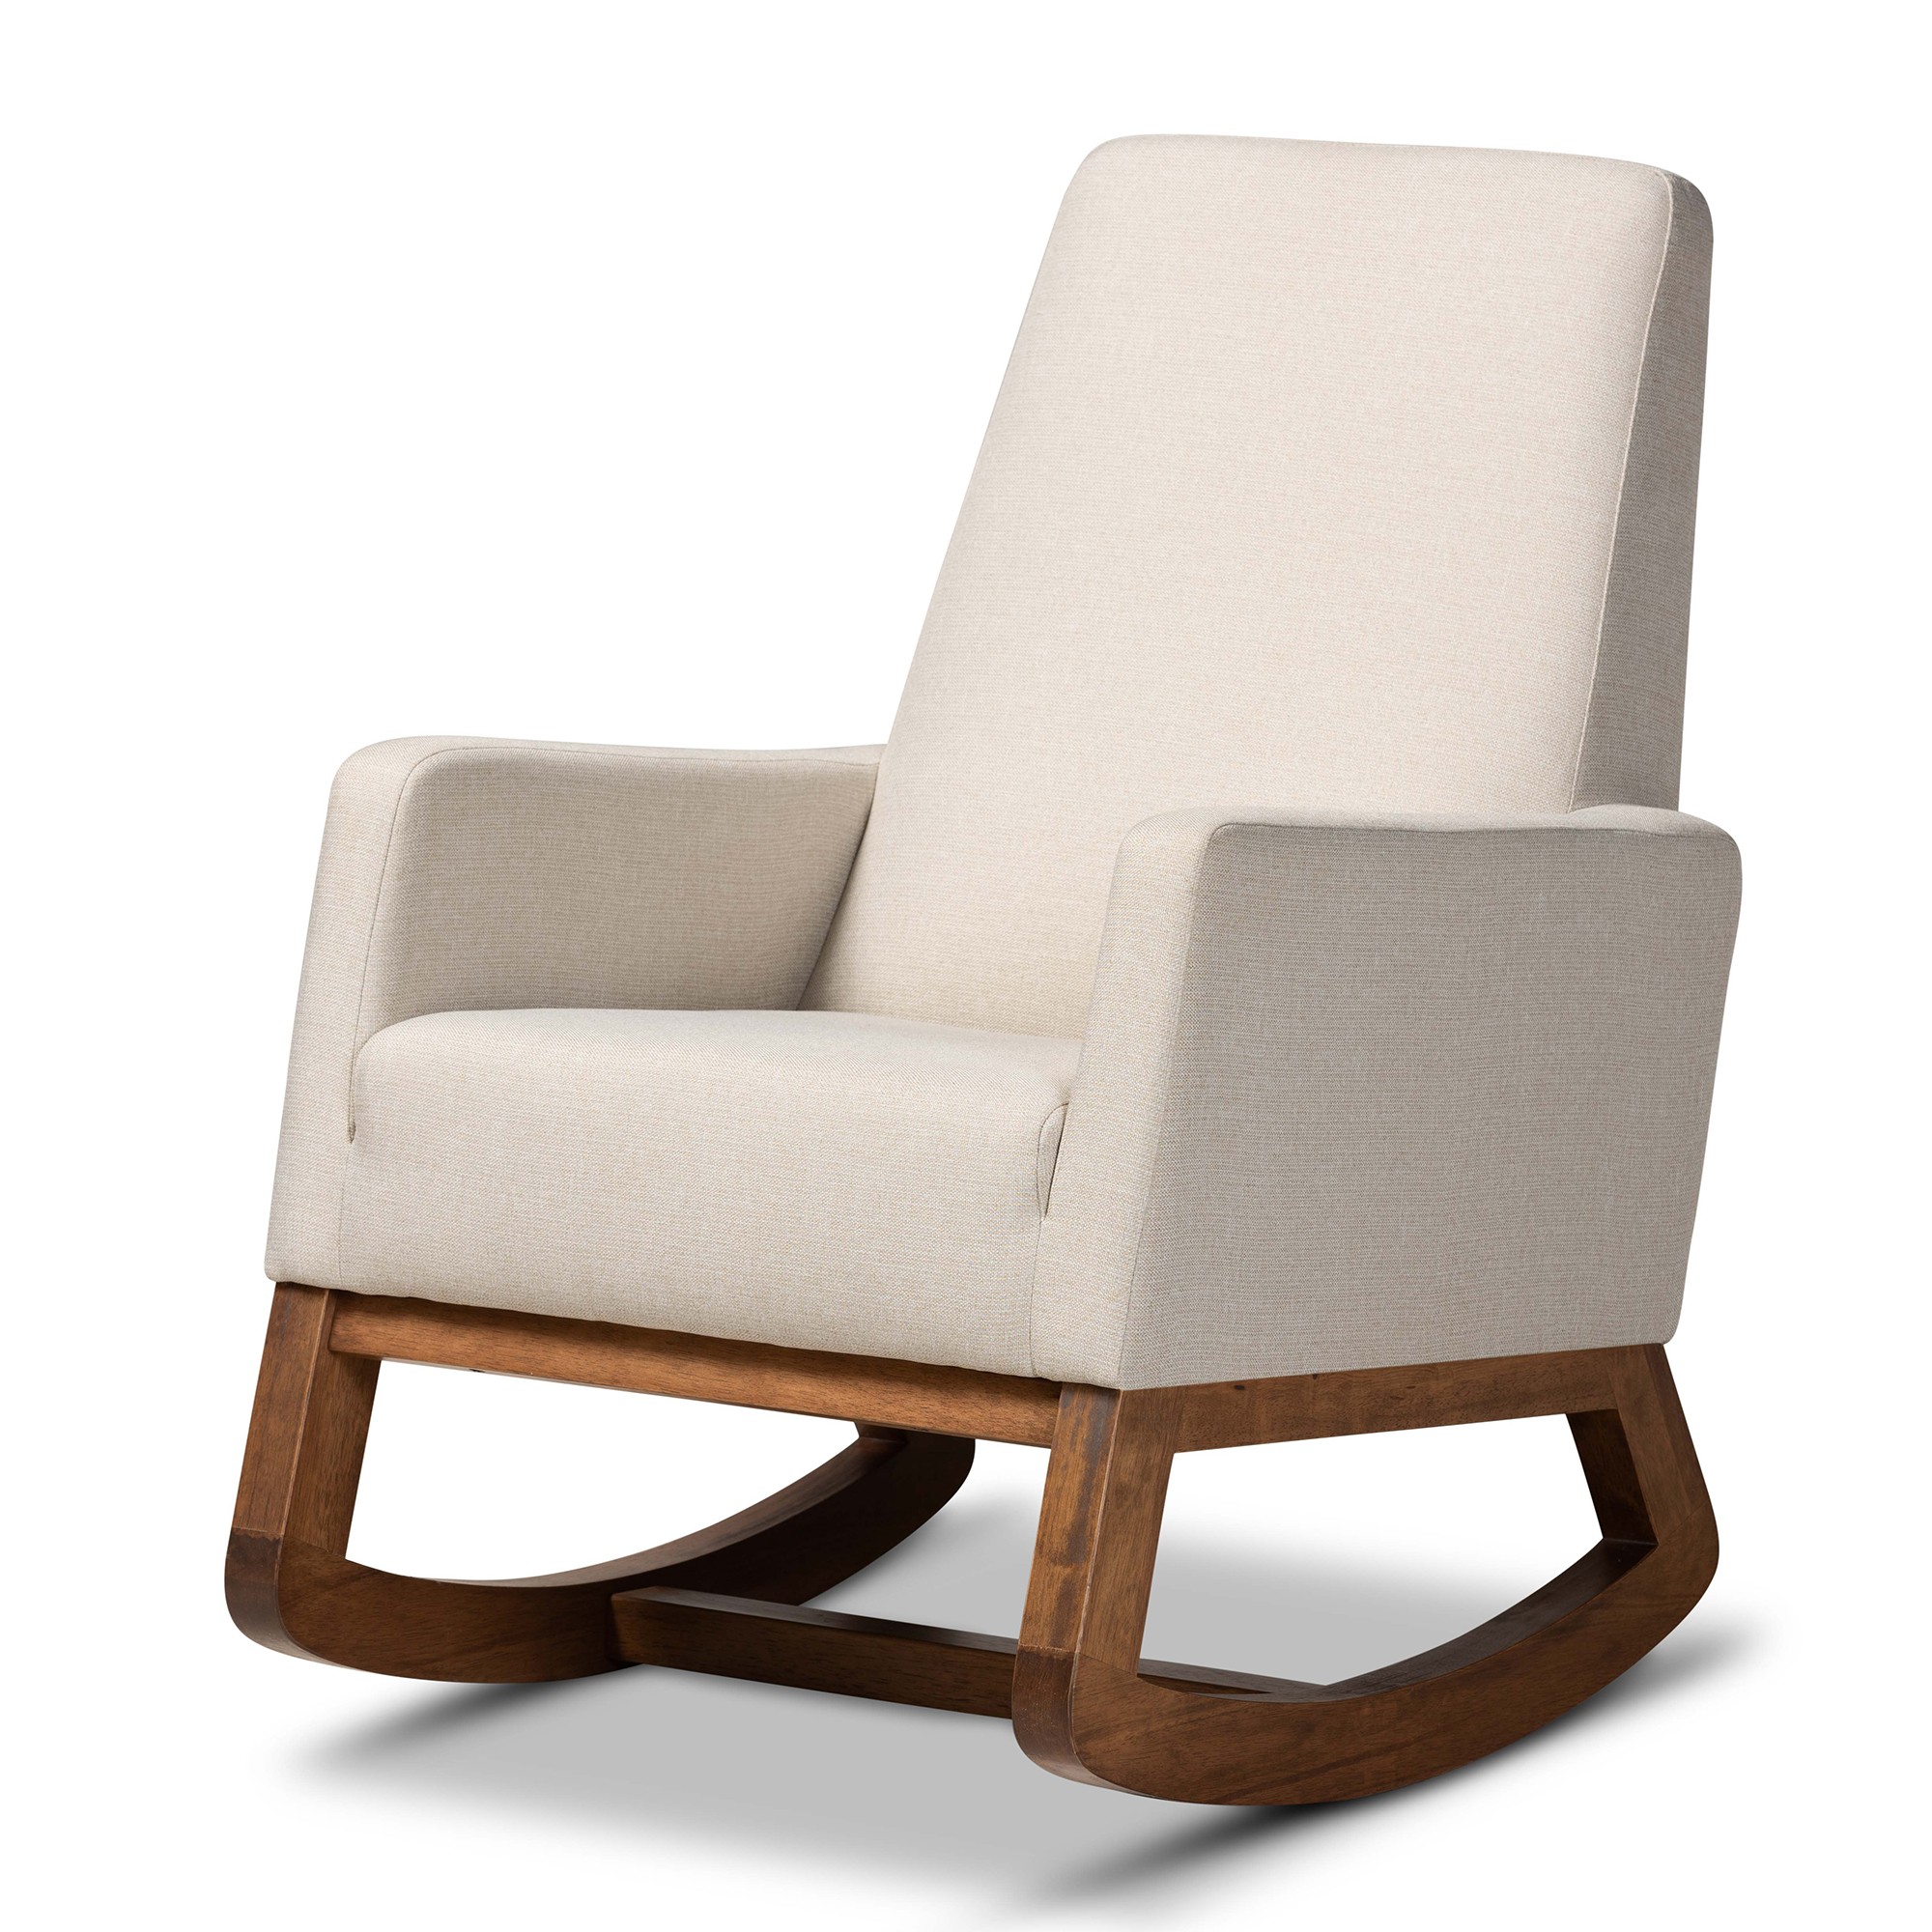 Baxton Studio Yashiya Mid-century Retro Modern Light Beige Fabric Upholstered Rocking Chair Affordable modern furniture in Chicago, classic living room furniture, modern rocking chairs, cheap rocking chairs